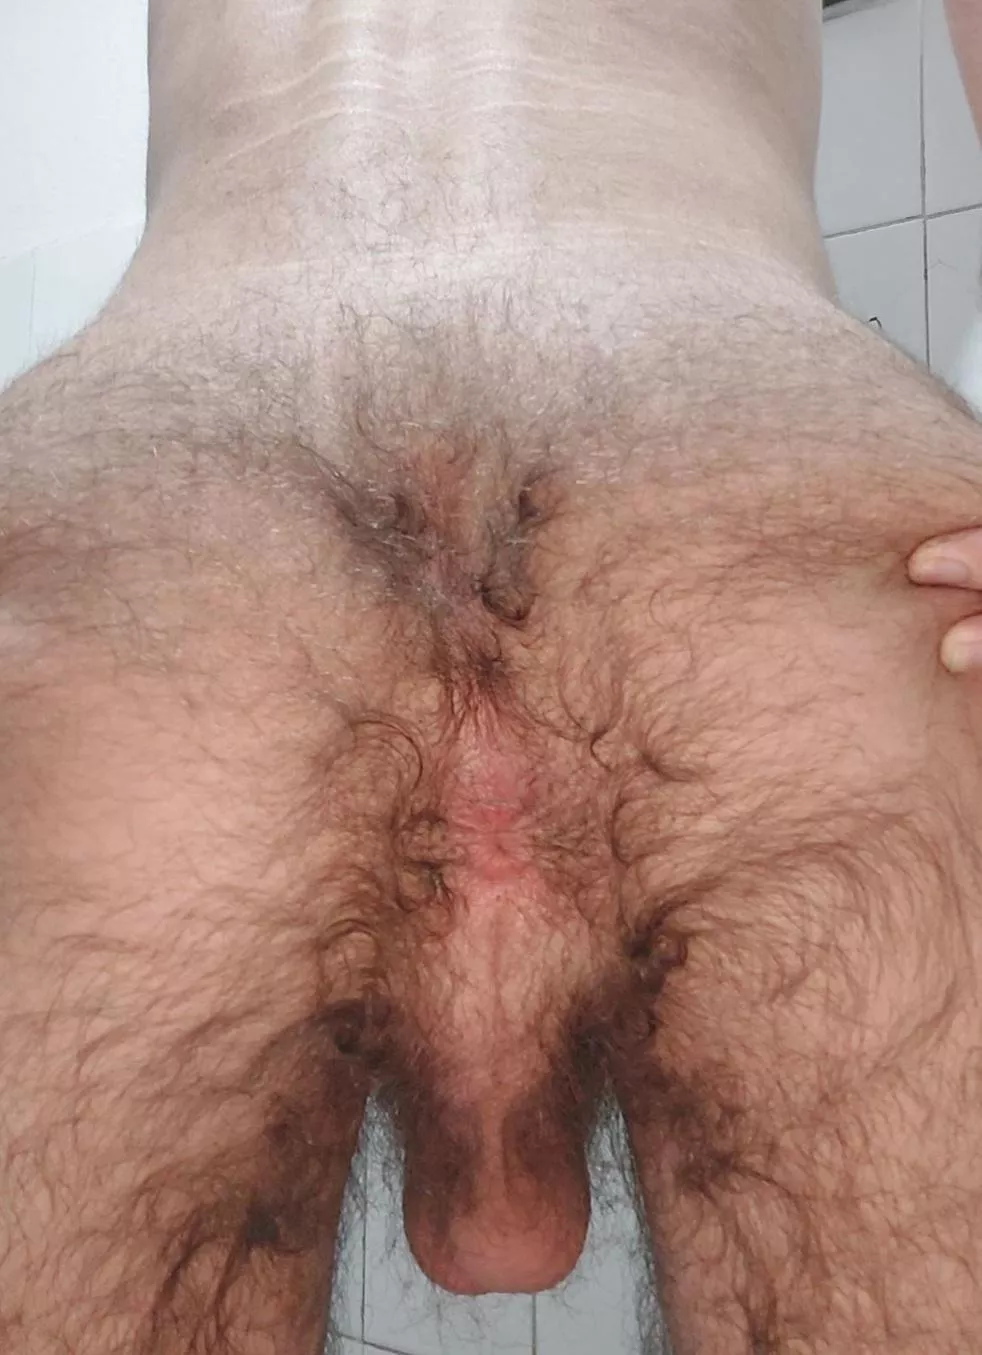 Hairy Asshole Pictures